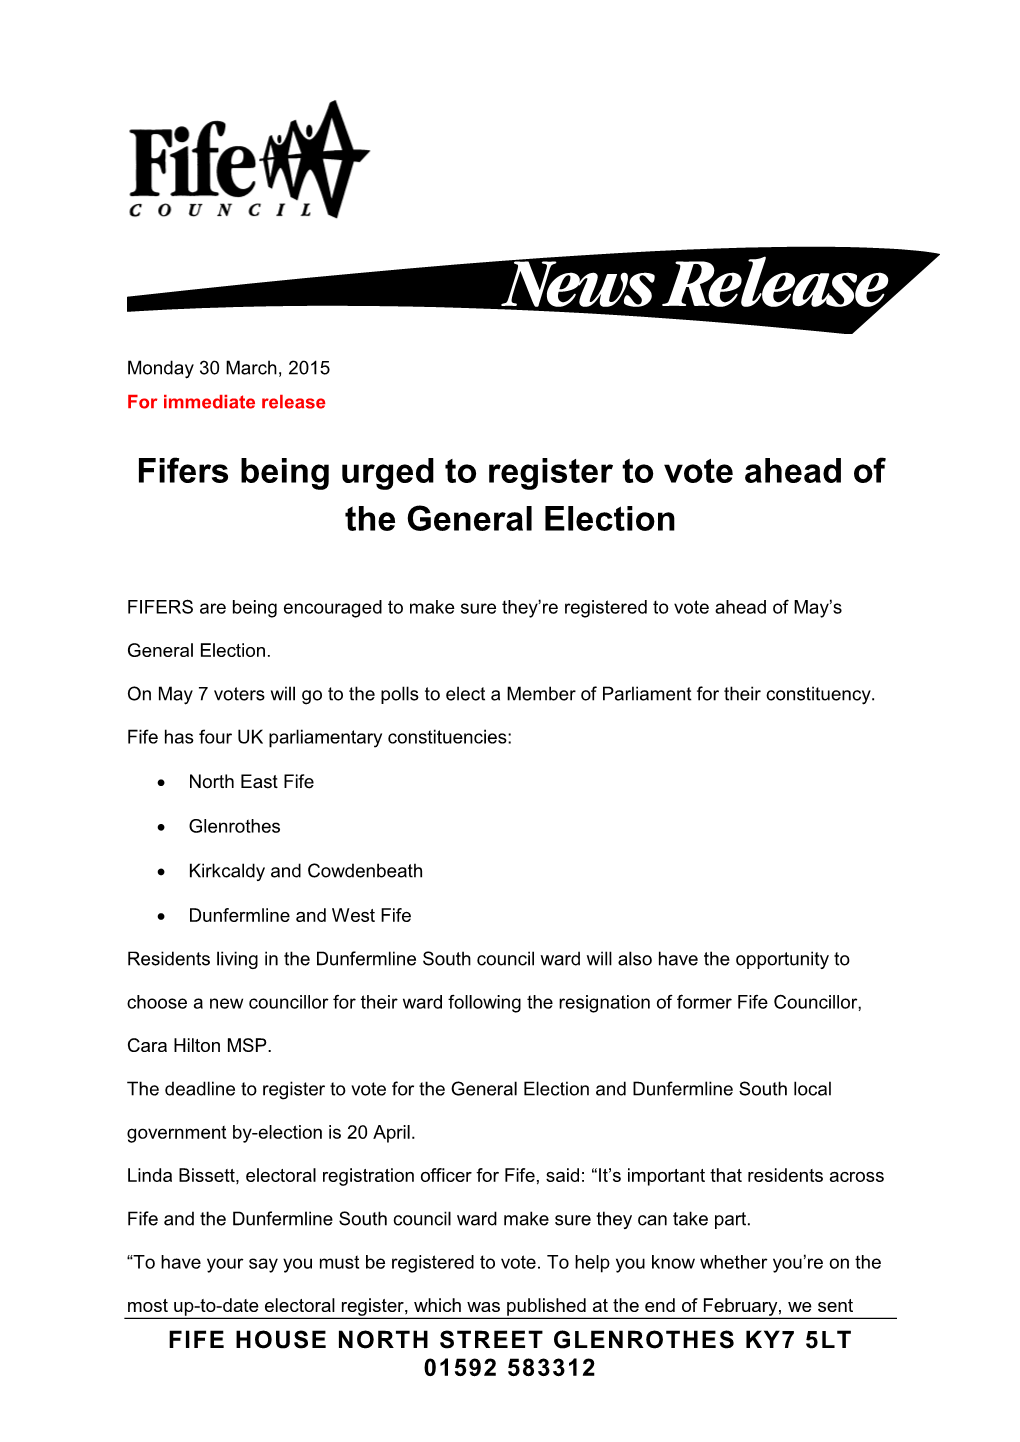 Fifers Being Urged to Register to Vote Ahead of the General Election